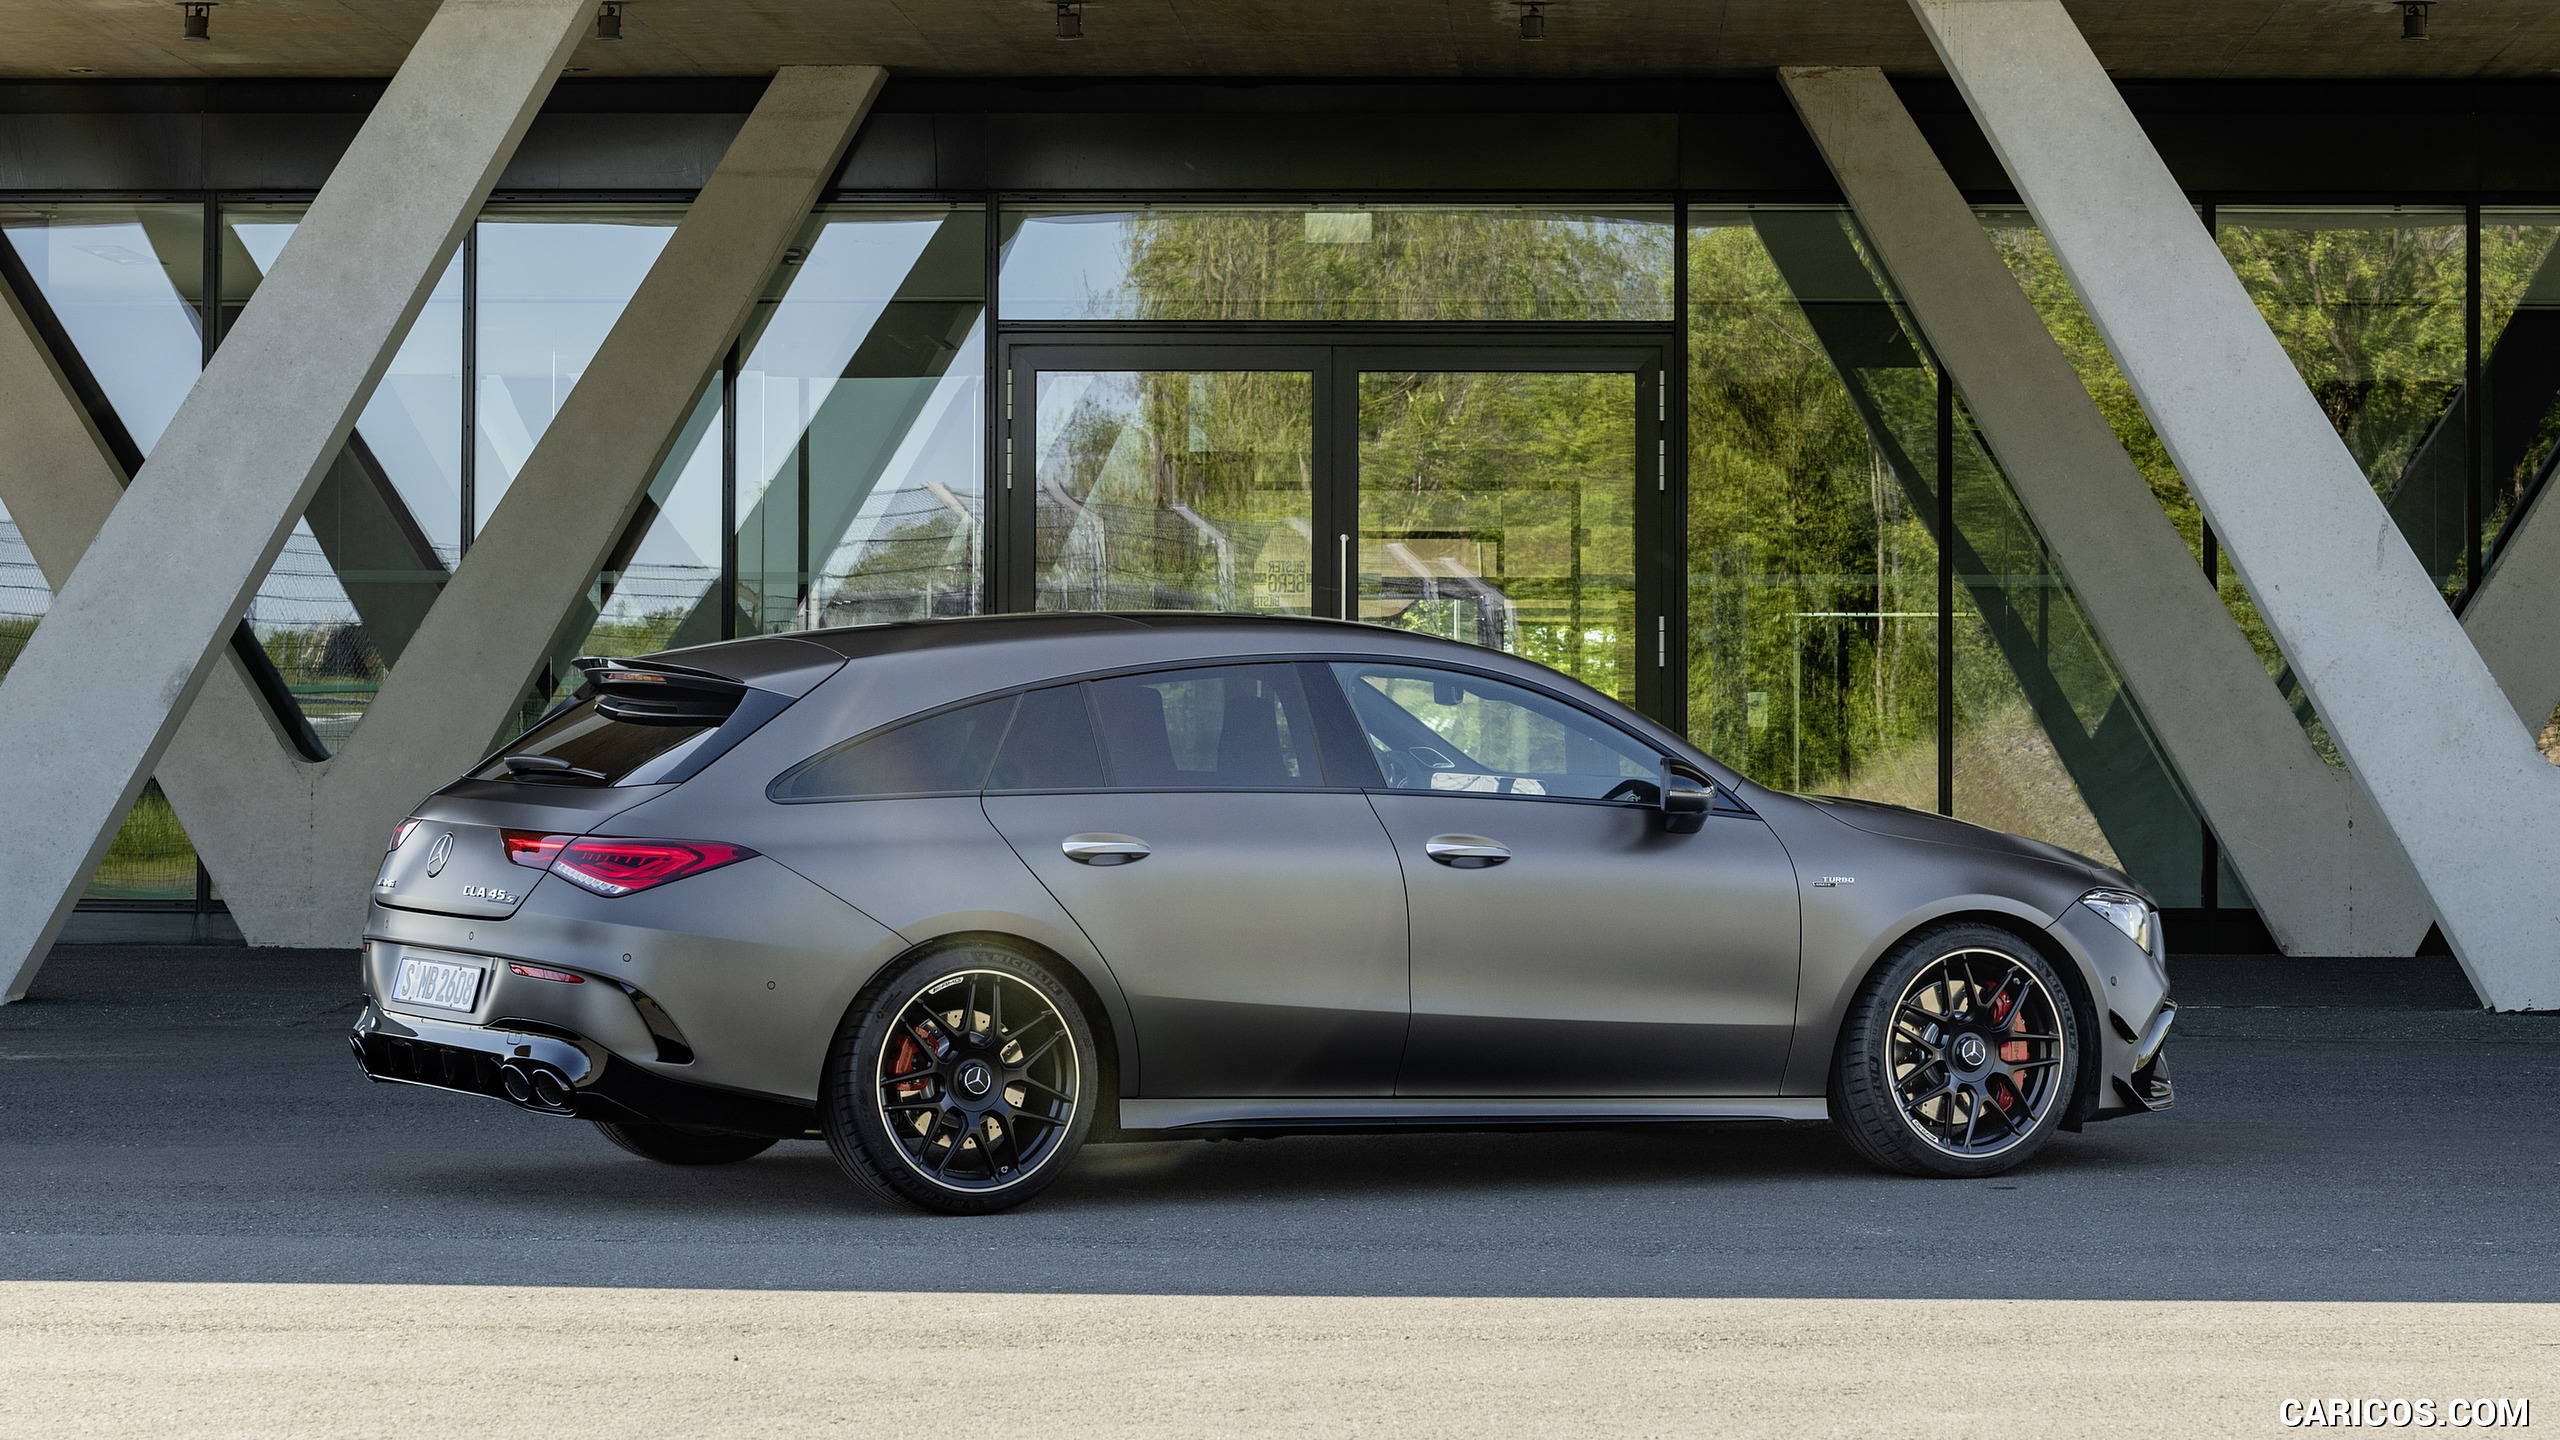 2020 Mercedes-AMG CLA 45 S 4MATIC+ Shooting Brake - Side, #22 of 35